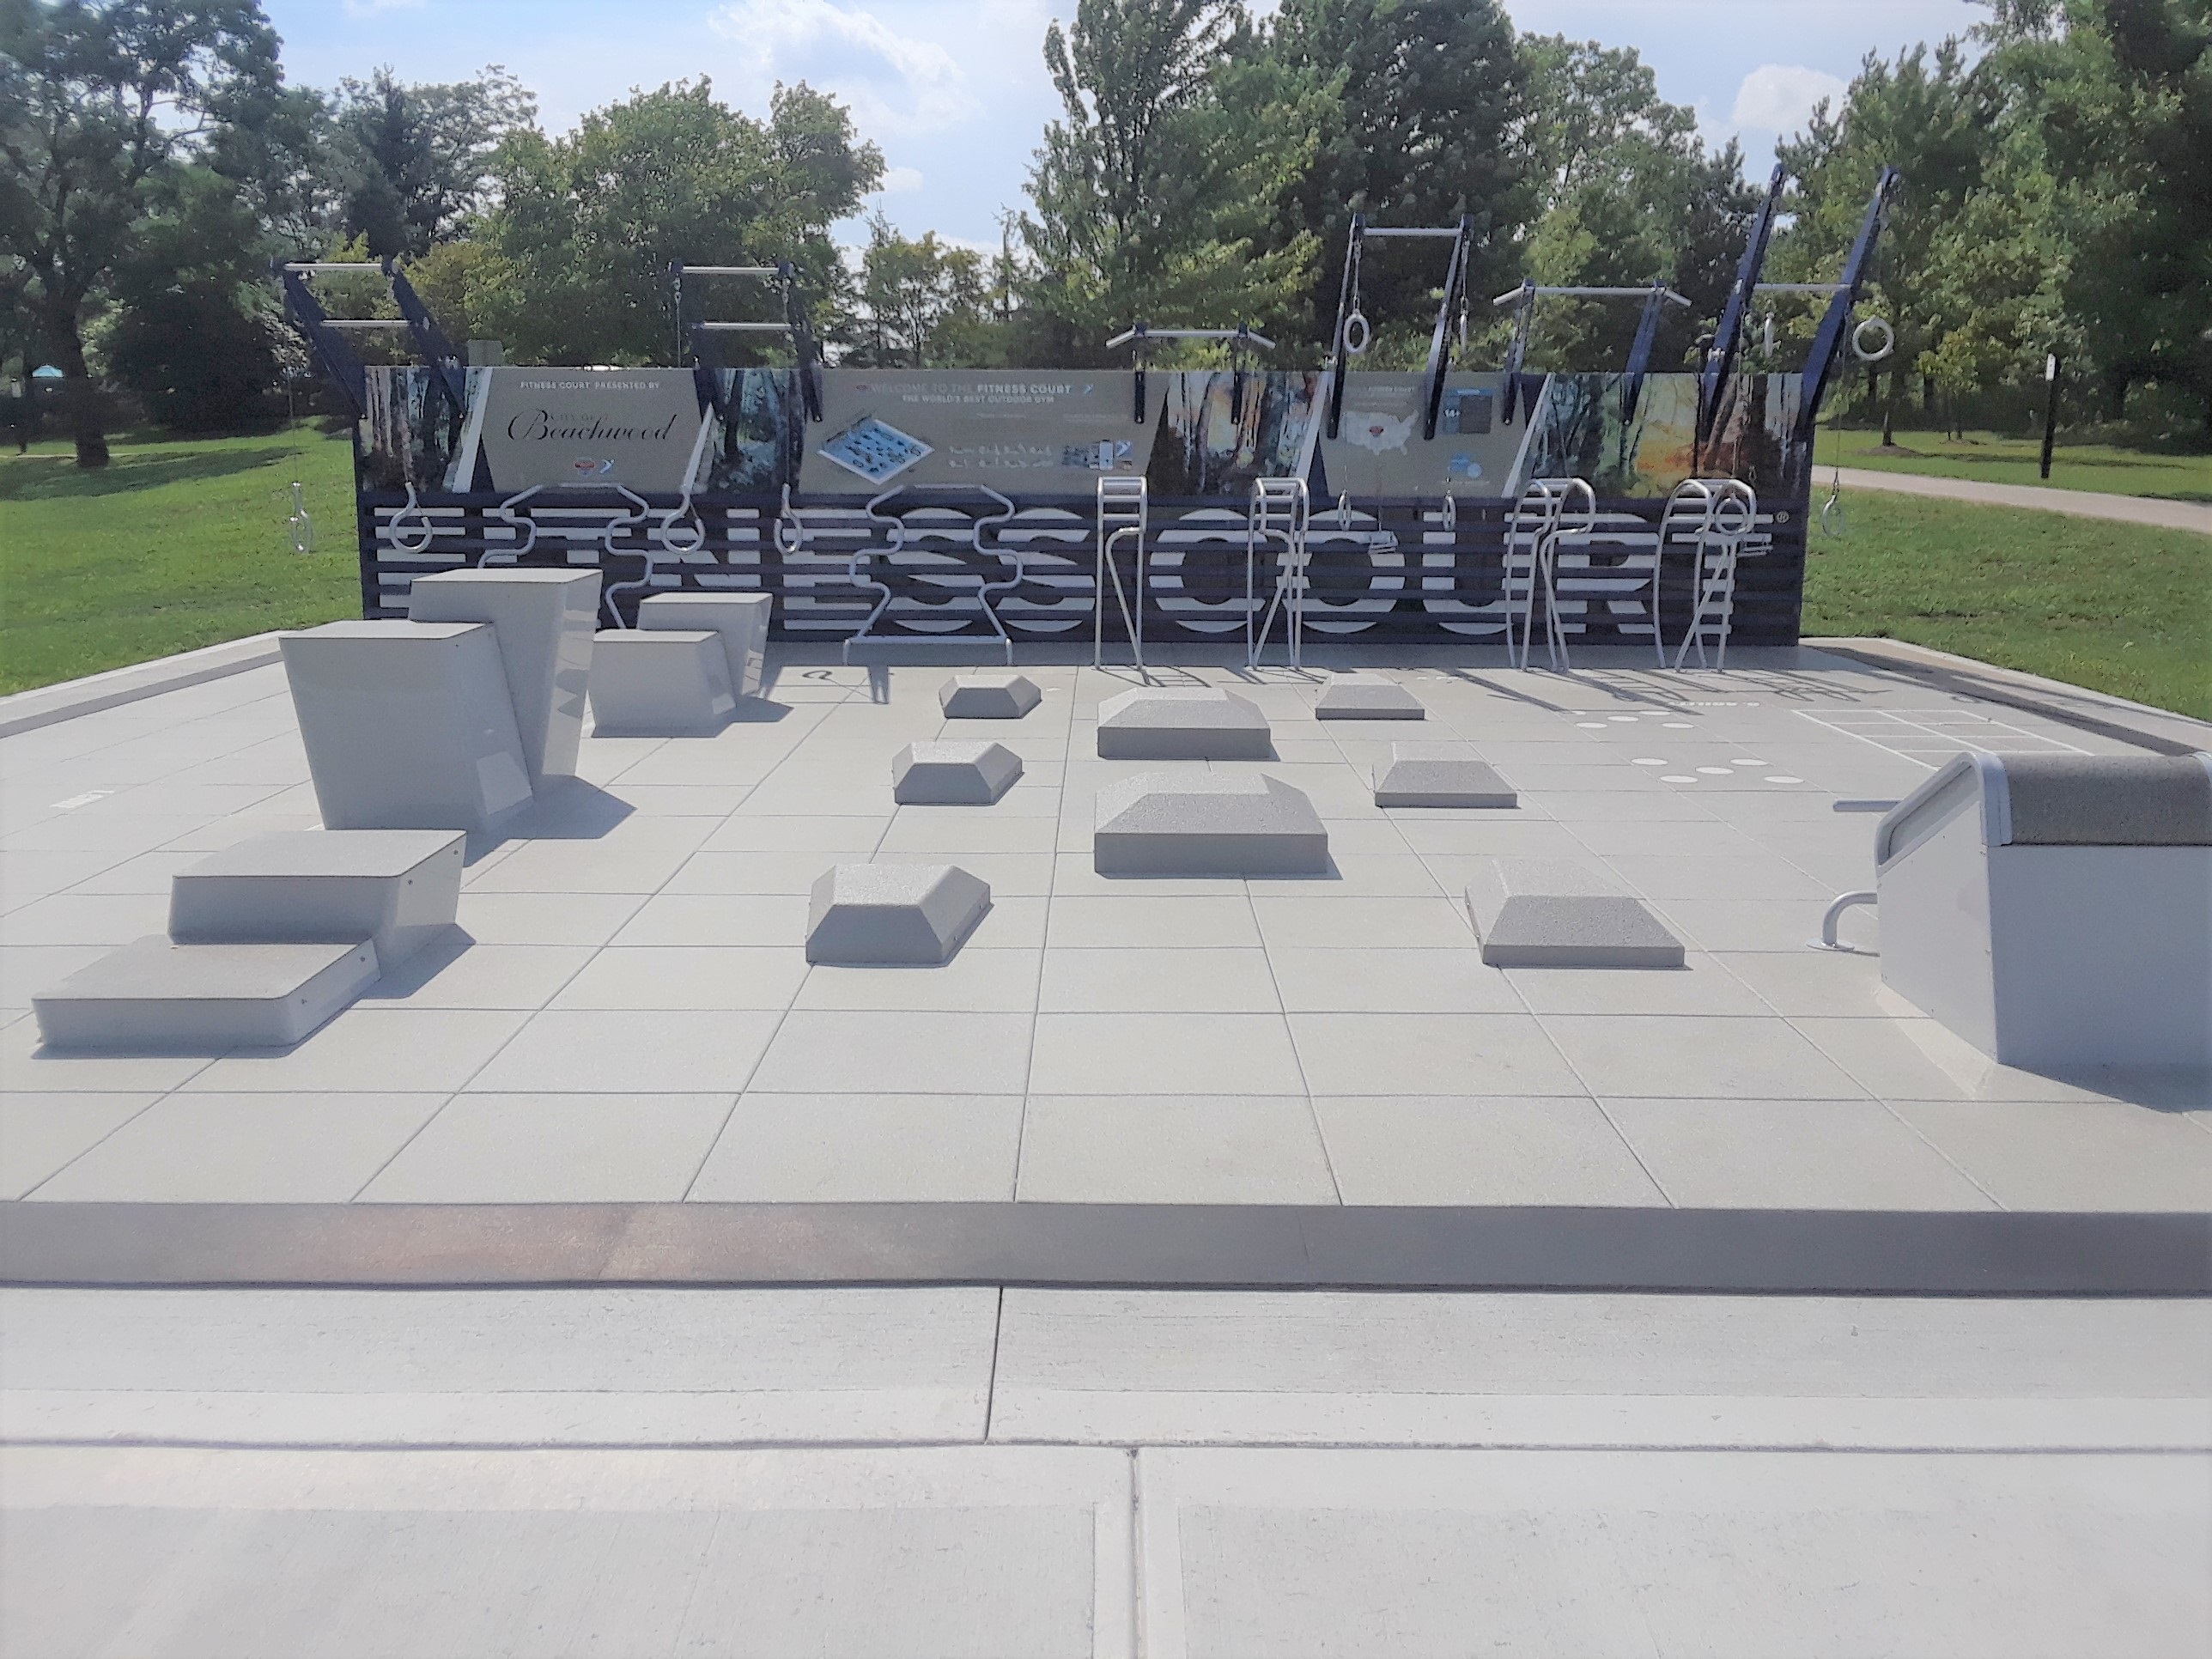 Beachwood's new Fitness Court offers opportunity to get a free